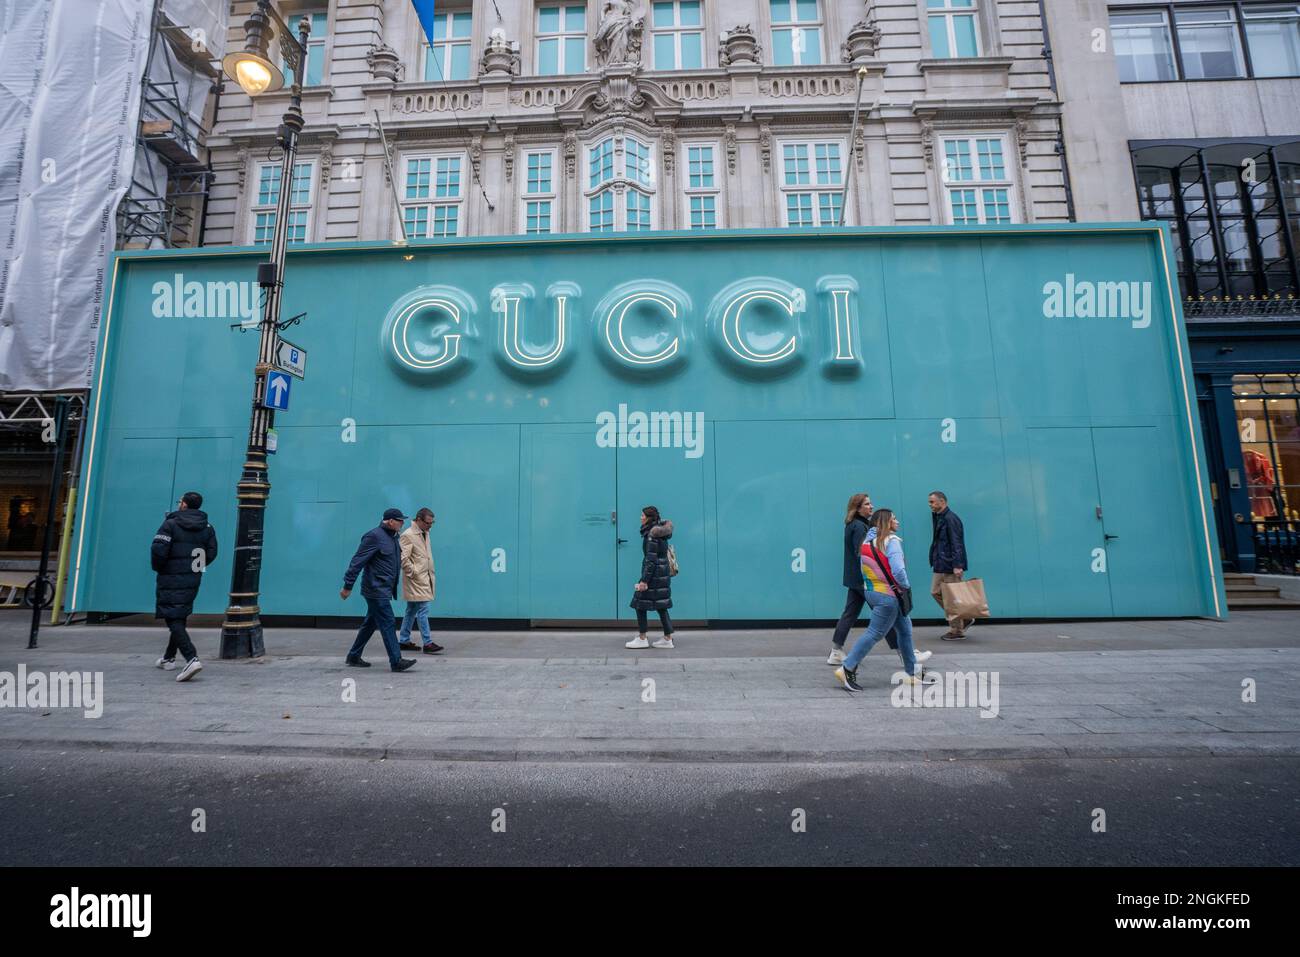 Gucci Makes a Big London Move, Swapping Old Bond for New Bond Street – WWD